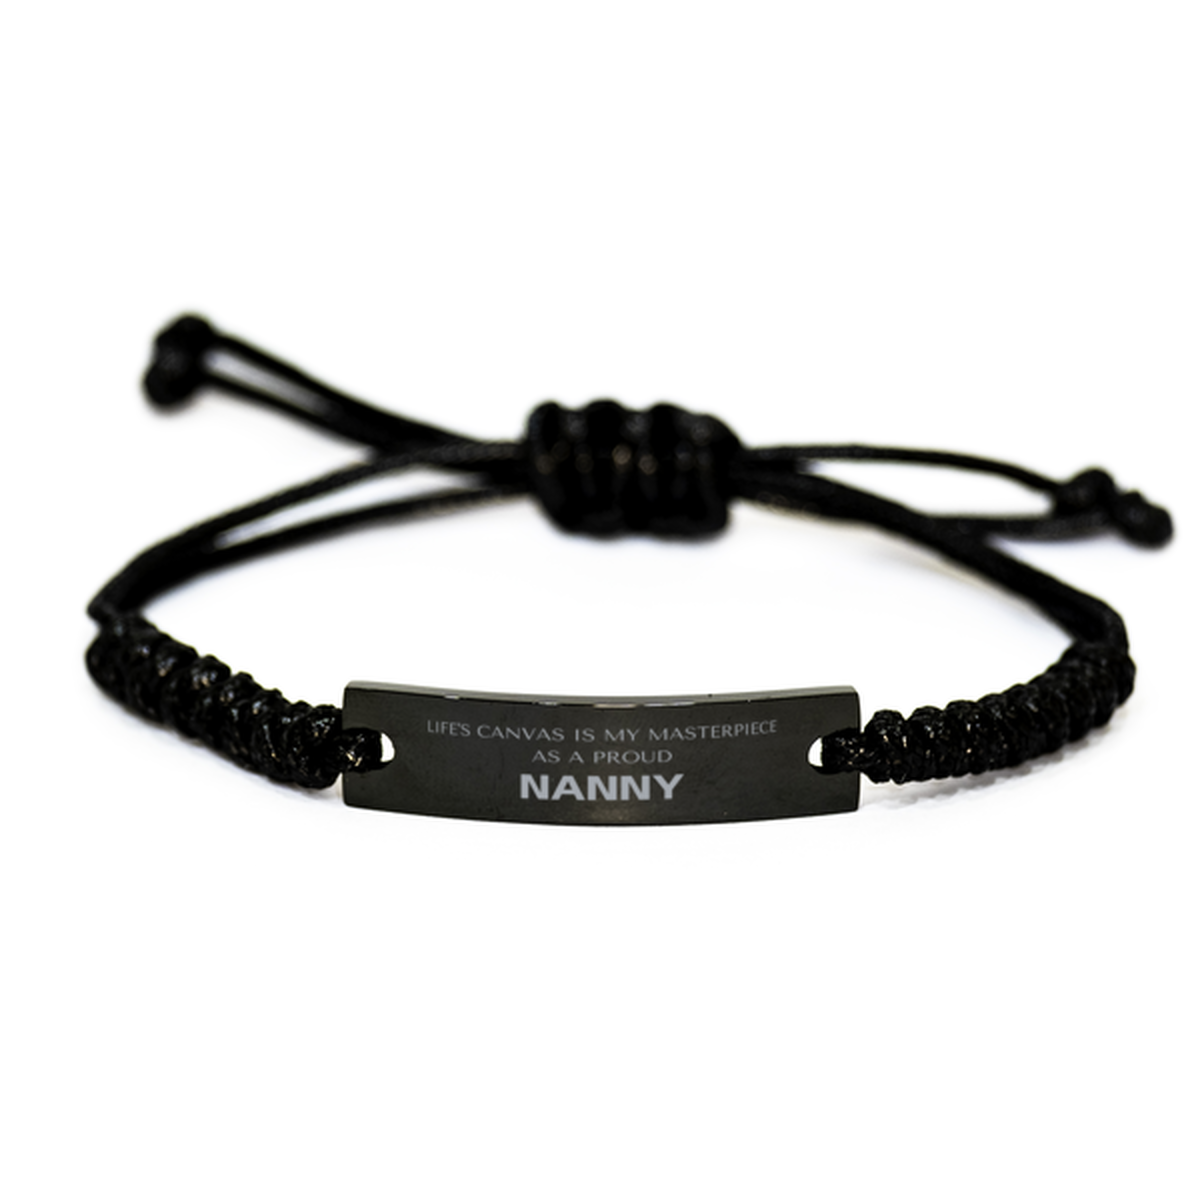 Proud Nanny Gifts, Life's canvas is my masterpiece, Epic Birthday Christmas Unique Black Rope Bracelet For Nanny, Coworkers, Men, Women, Friends